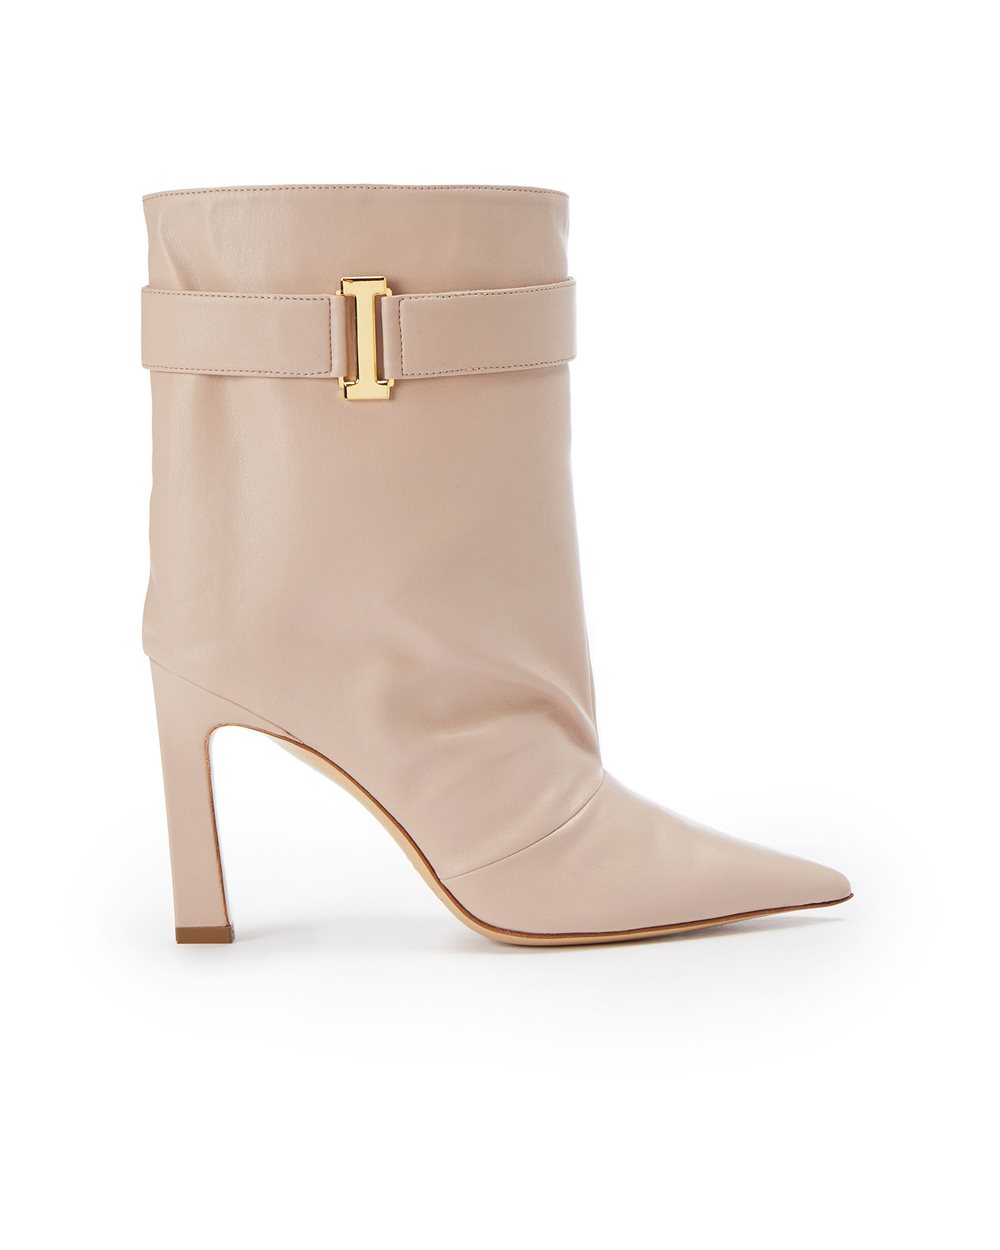 Donatee Low Heels Ankle Boots In Beige Leather, StclaircomoShops, Philippe Model 'Antibes' sneakers